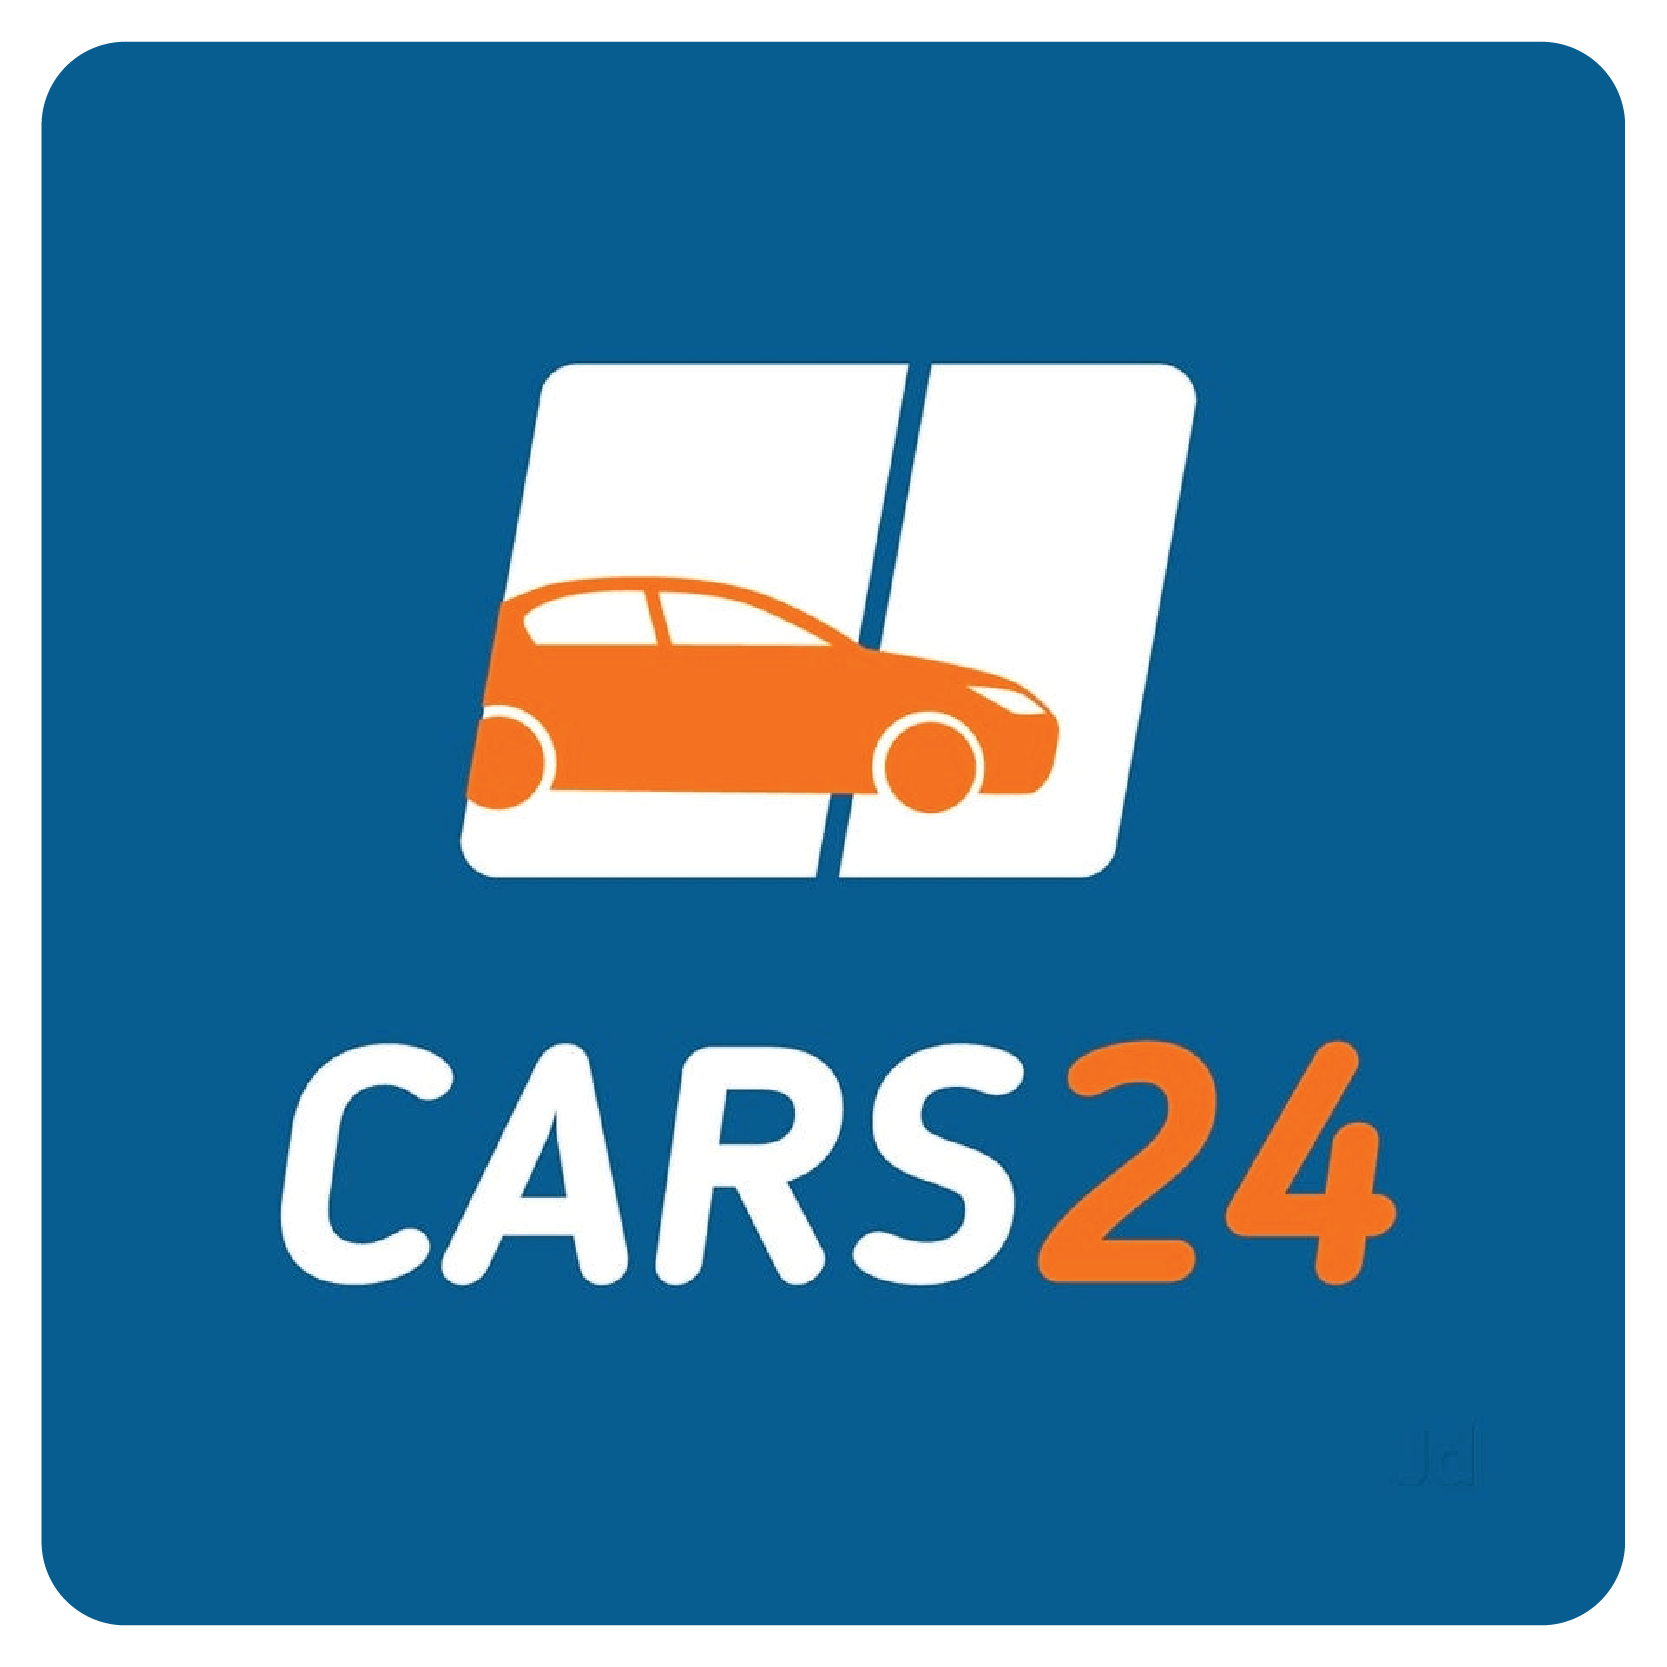 cars24 | yourstory